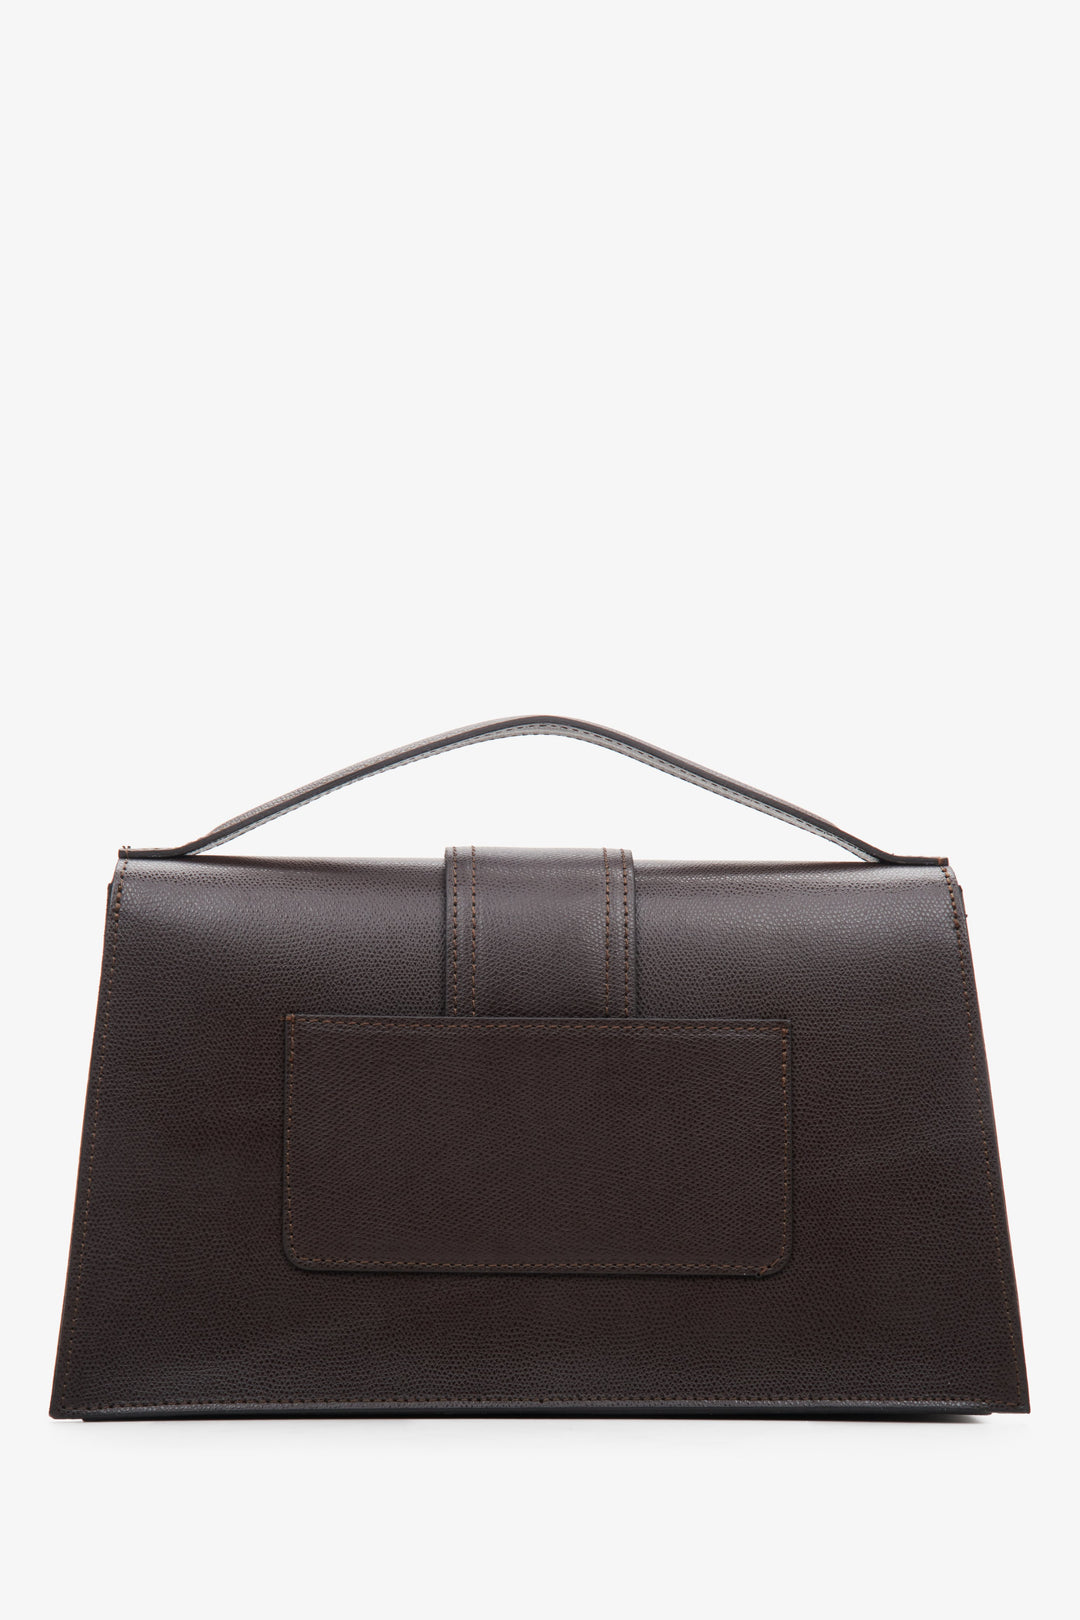 Women's dark brown leather handbag with a flap by Estro - back view.